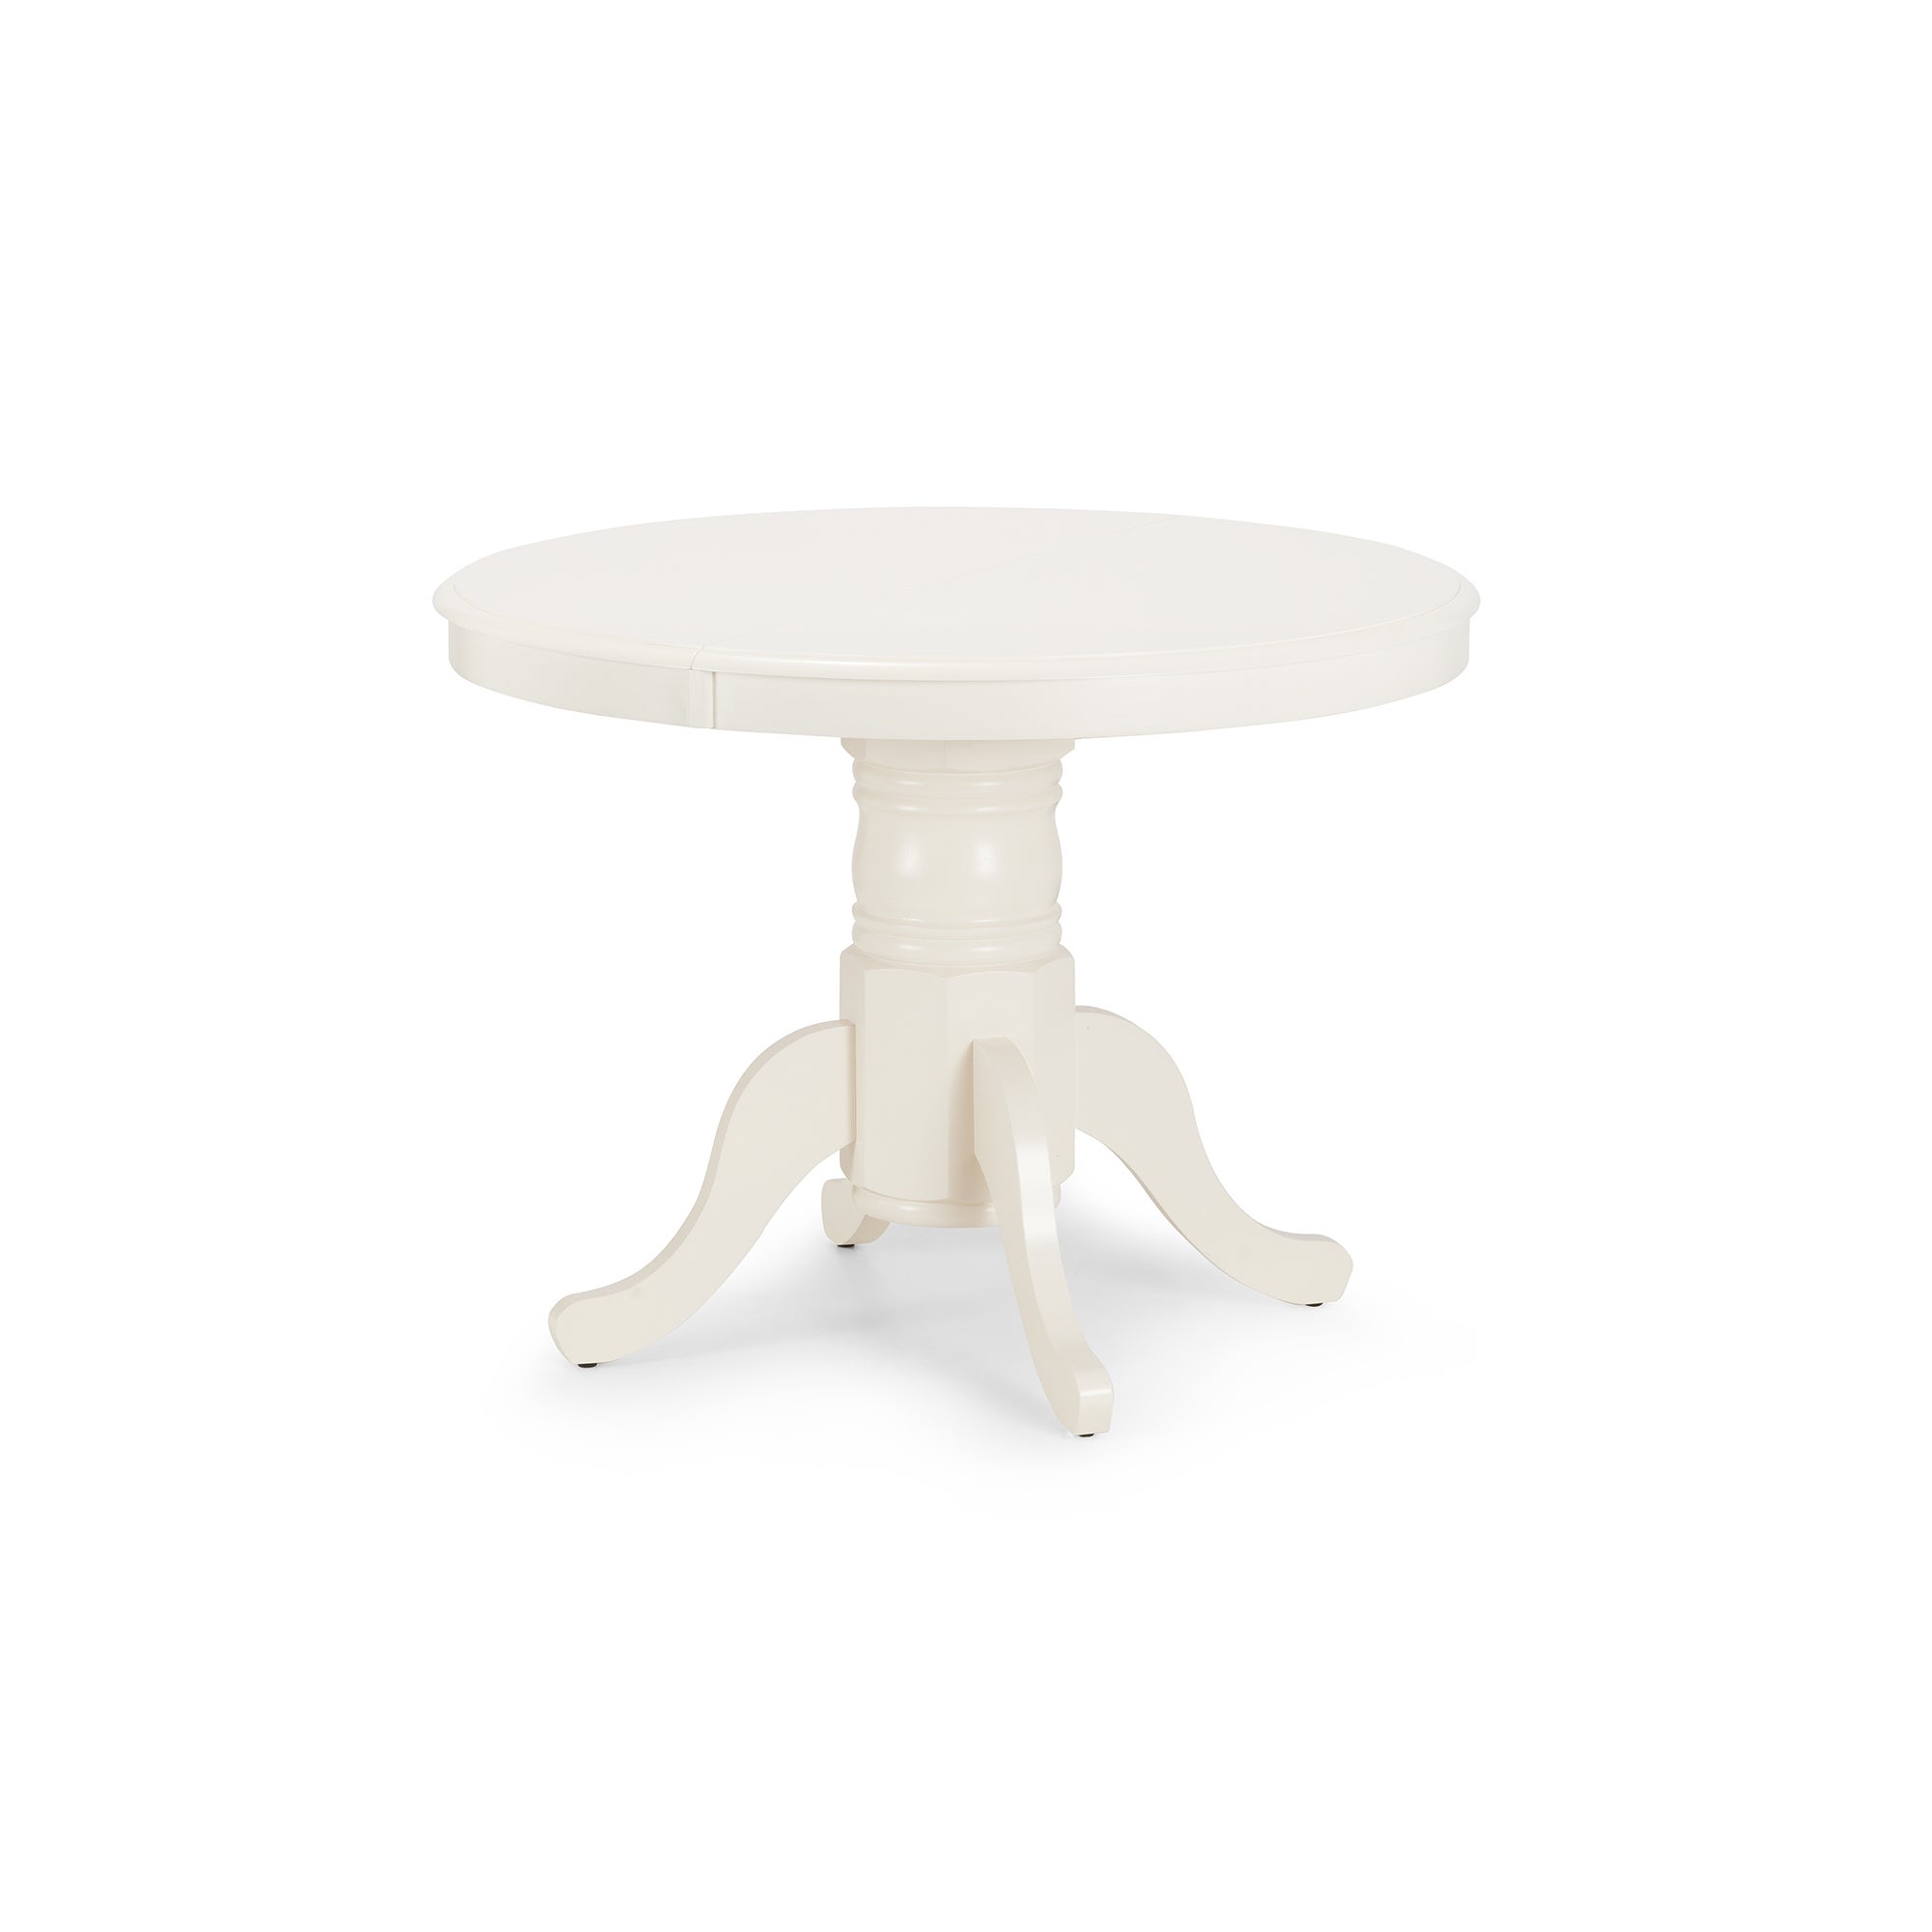 Stanmore 4 6 Seater Round Extendable Dining Table Off White Cream